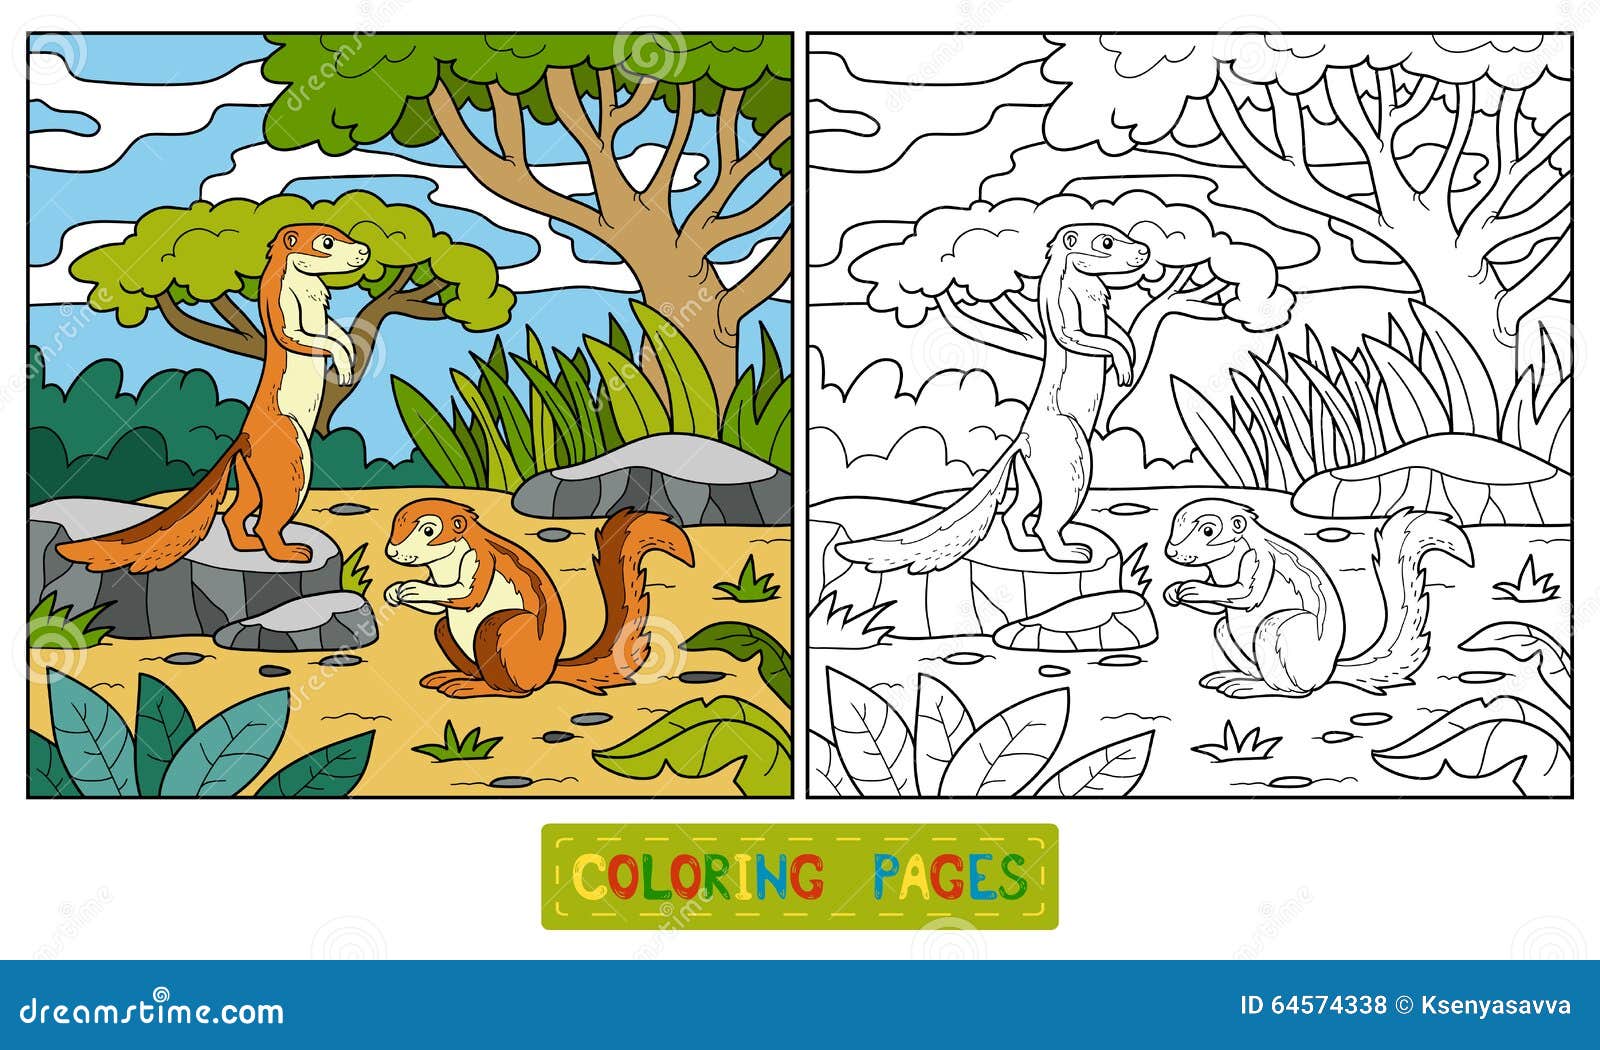 xerus squirrel coloring pages - photo #14